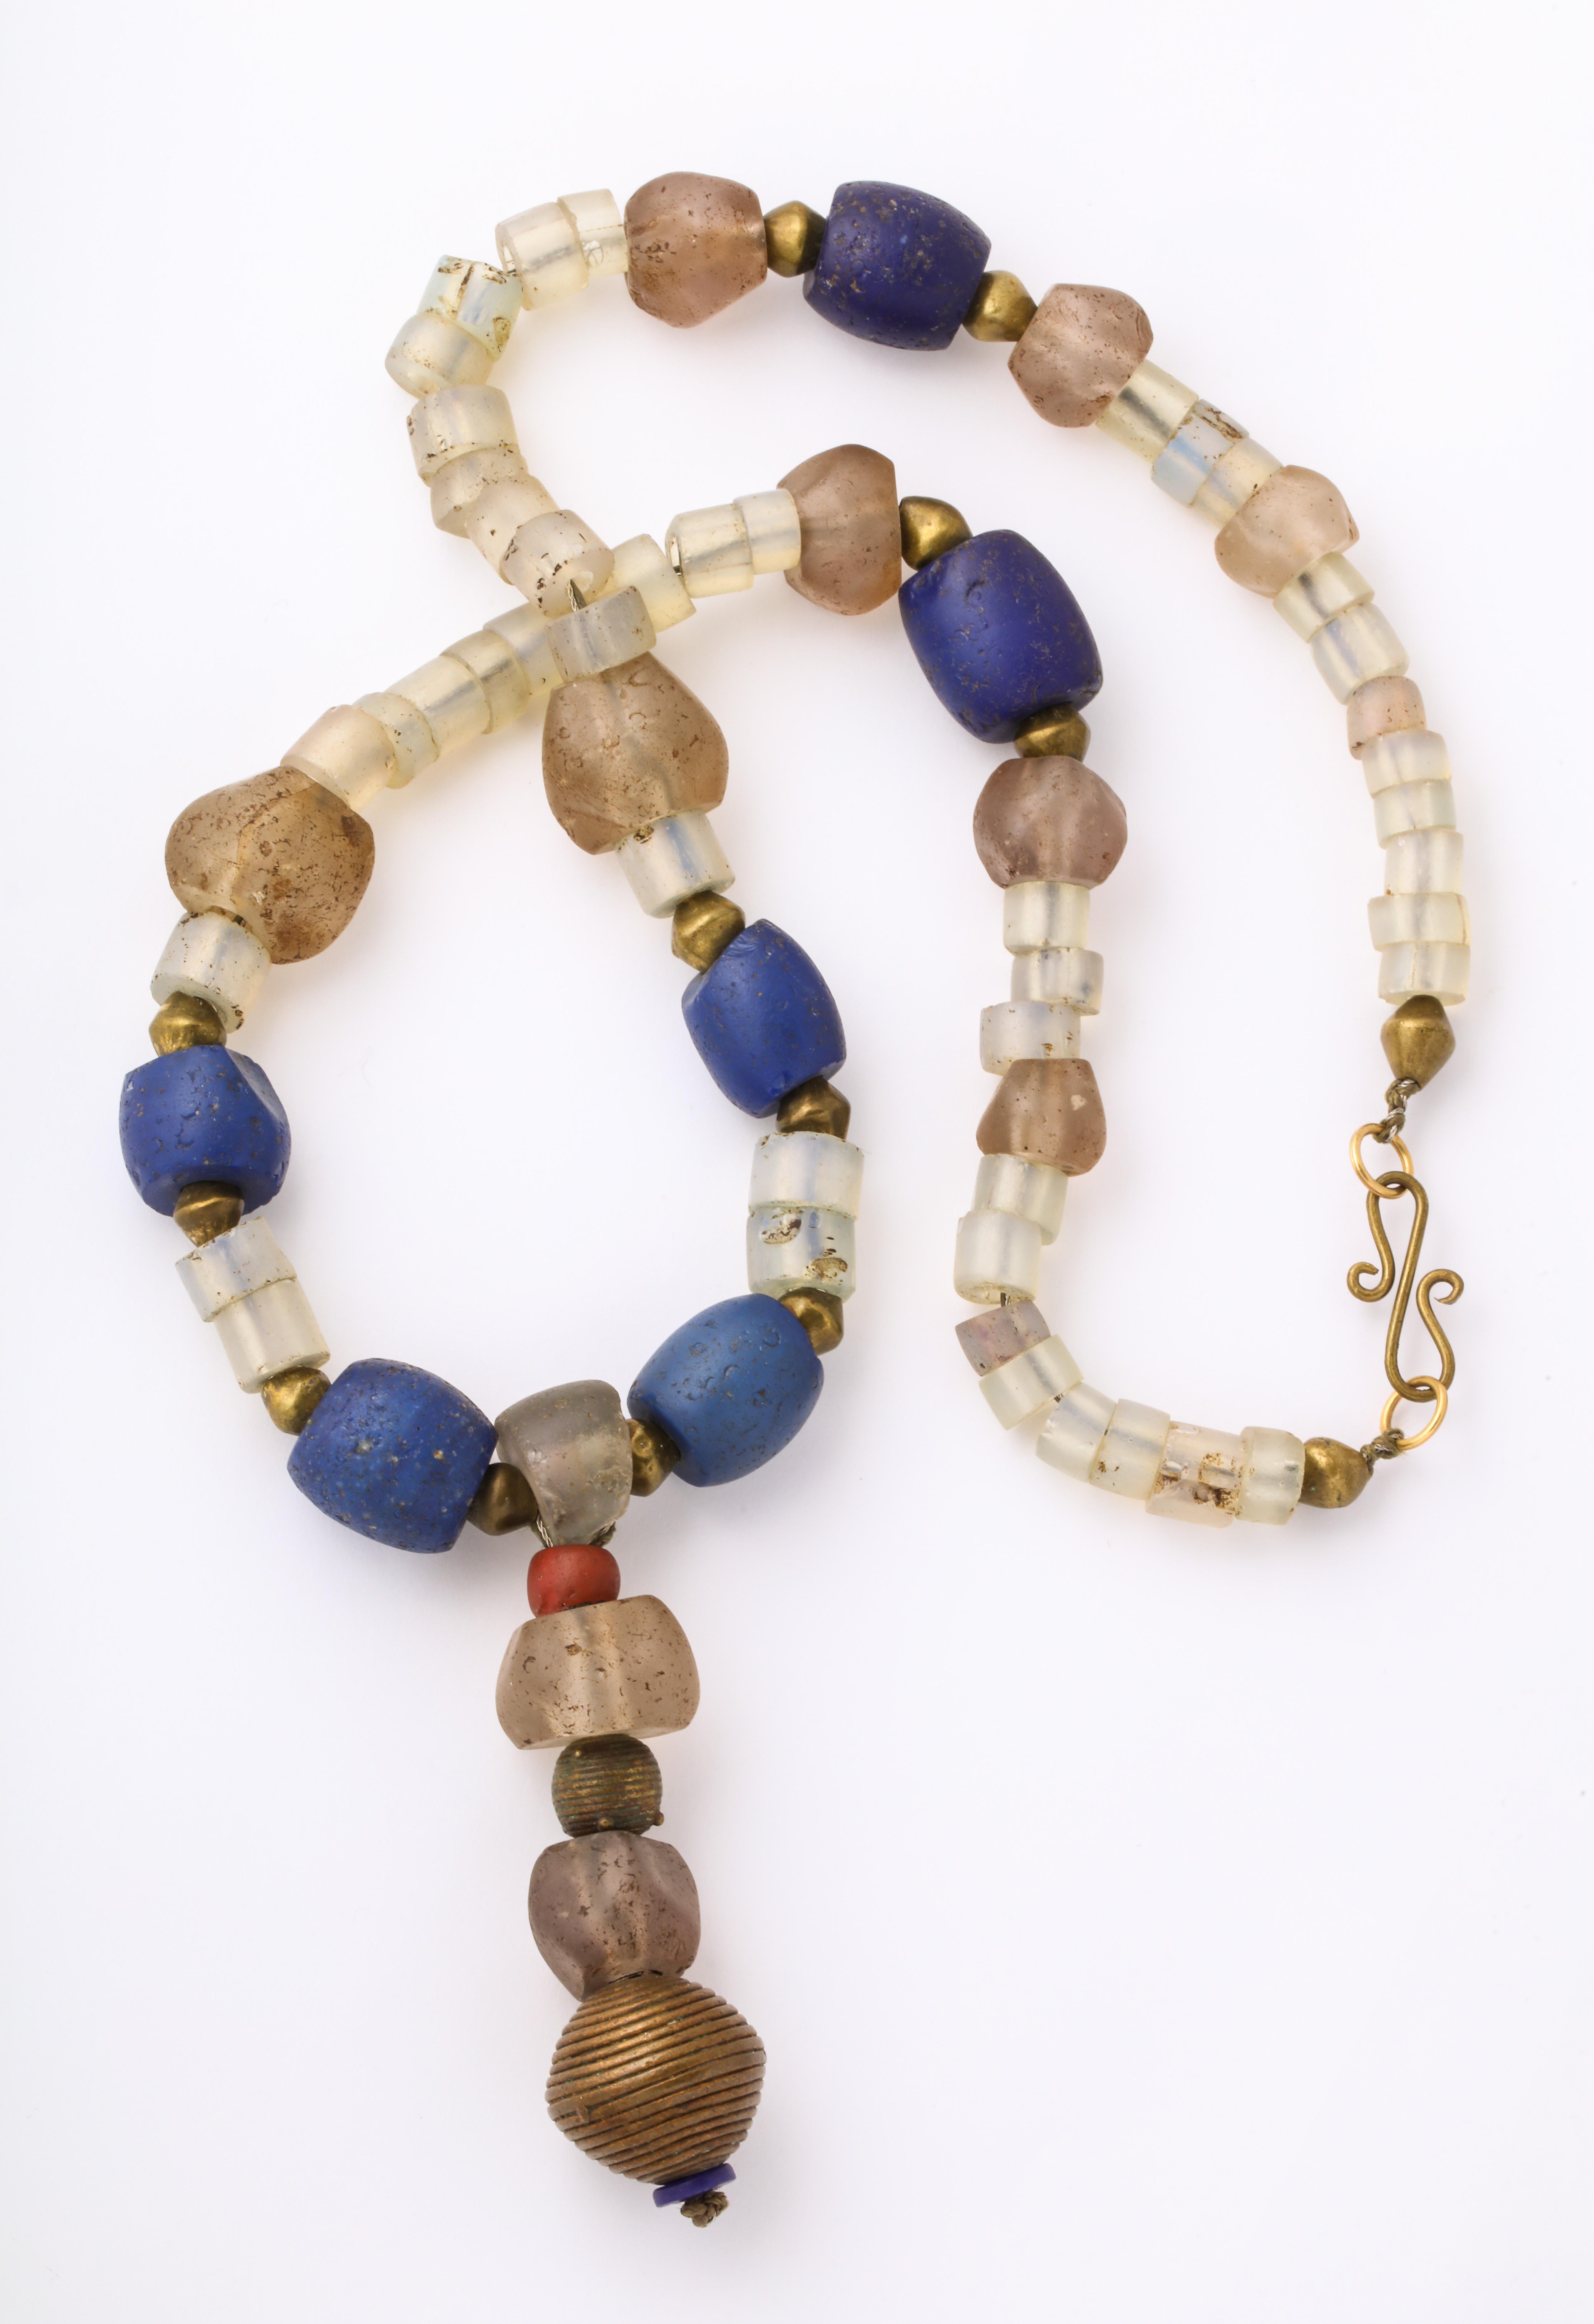 A fabulous story out of Africa, this lovely antique necklace is composed of various beads from the Ashanti Tribe in Ghana from the 19th century, Blue glass beads from the Nigeria, Opaque blue glass beads from Dogon Tribe centuries old and brass from